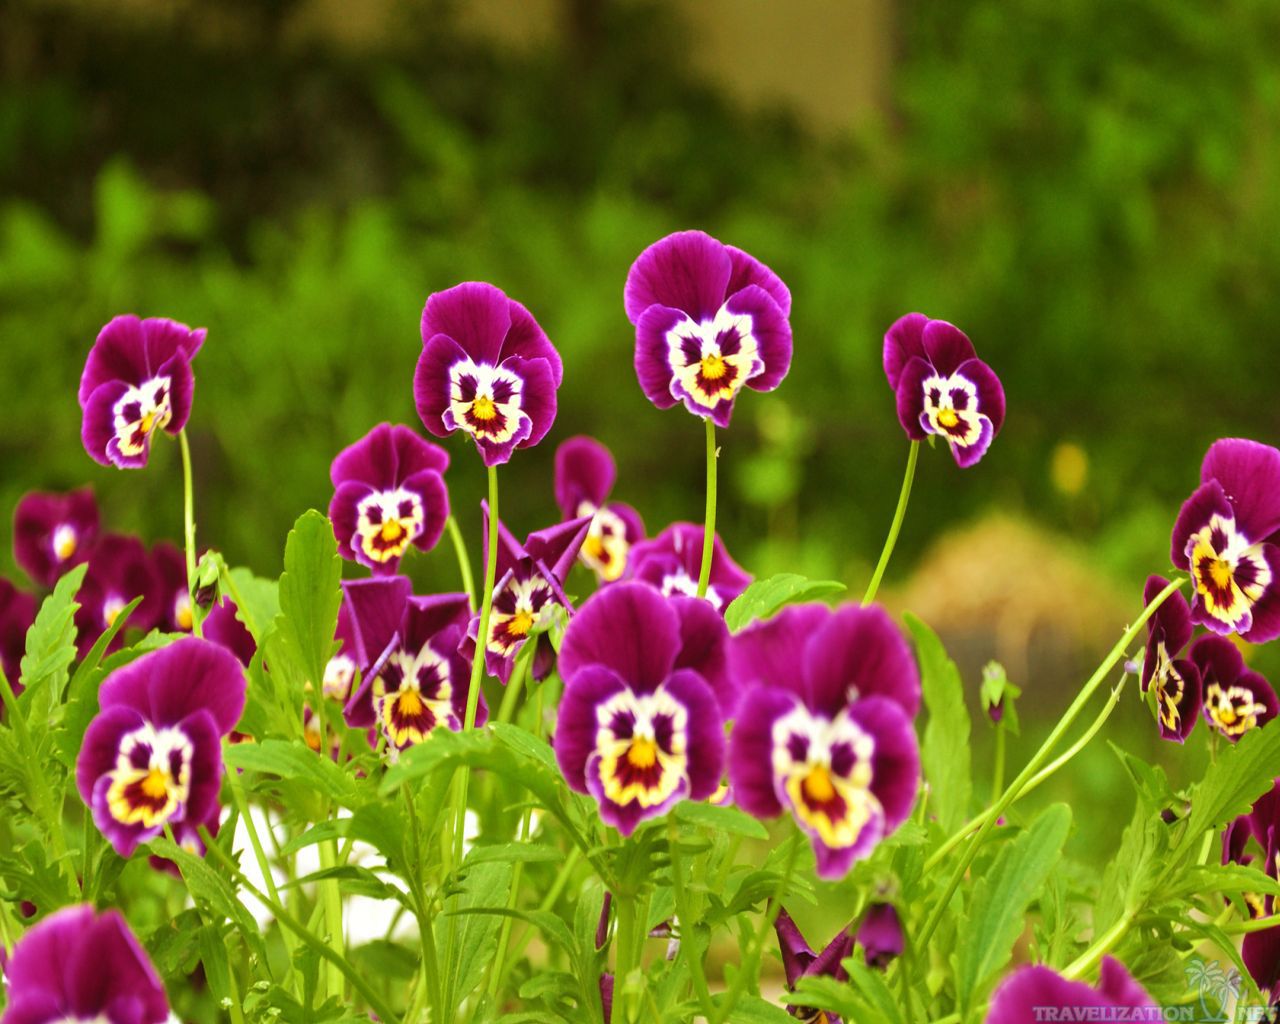 You can find Bright Pansies Flowers Wallpapers in many resolution such as 1024×768, ...